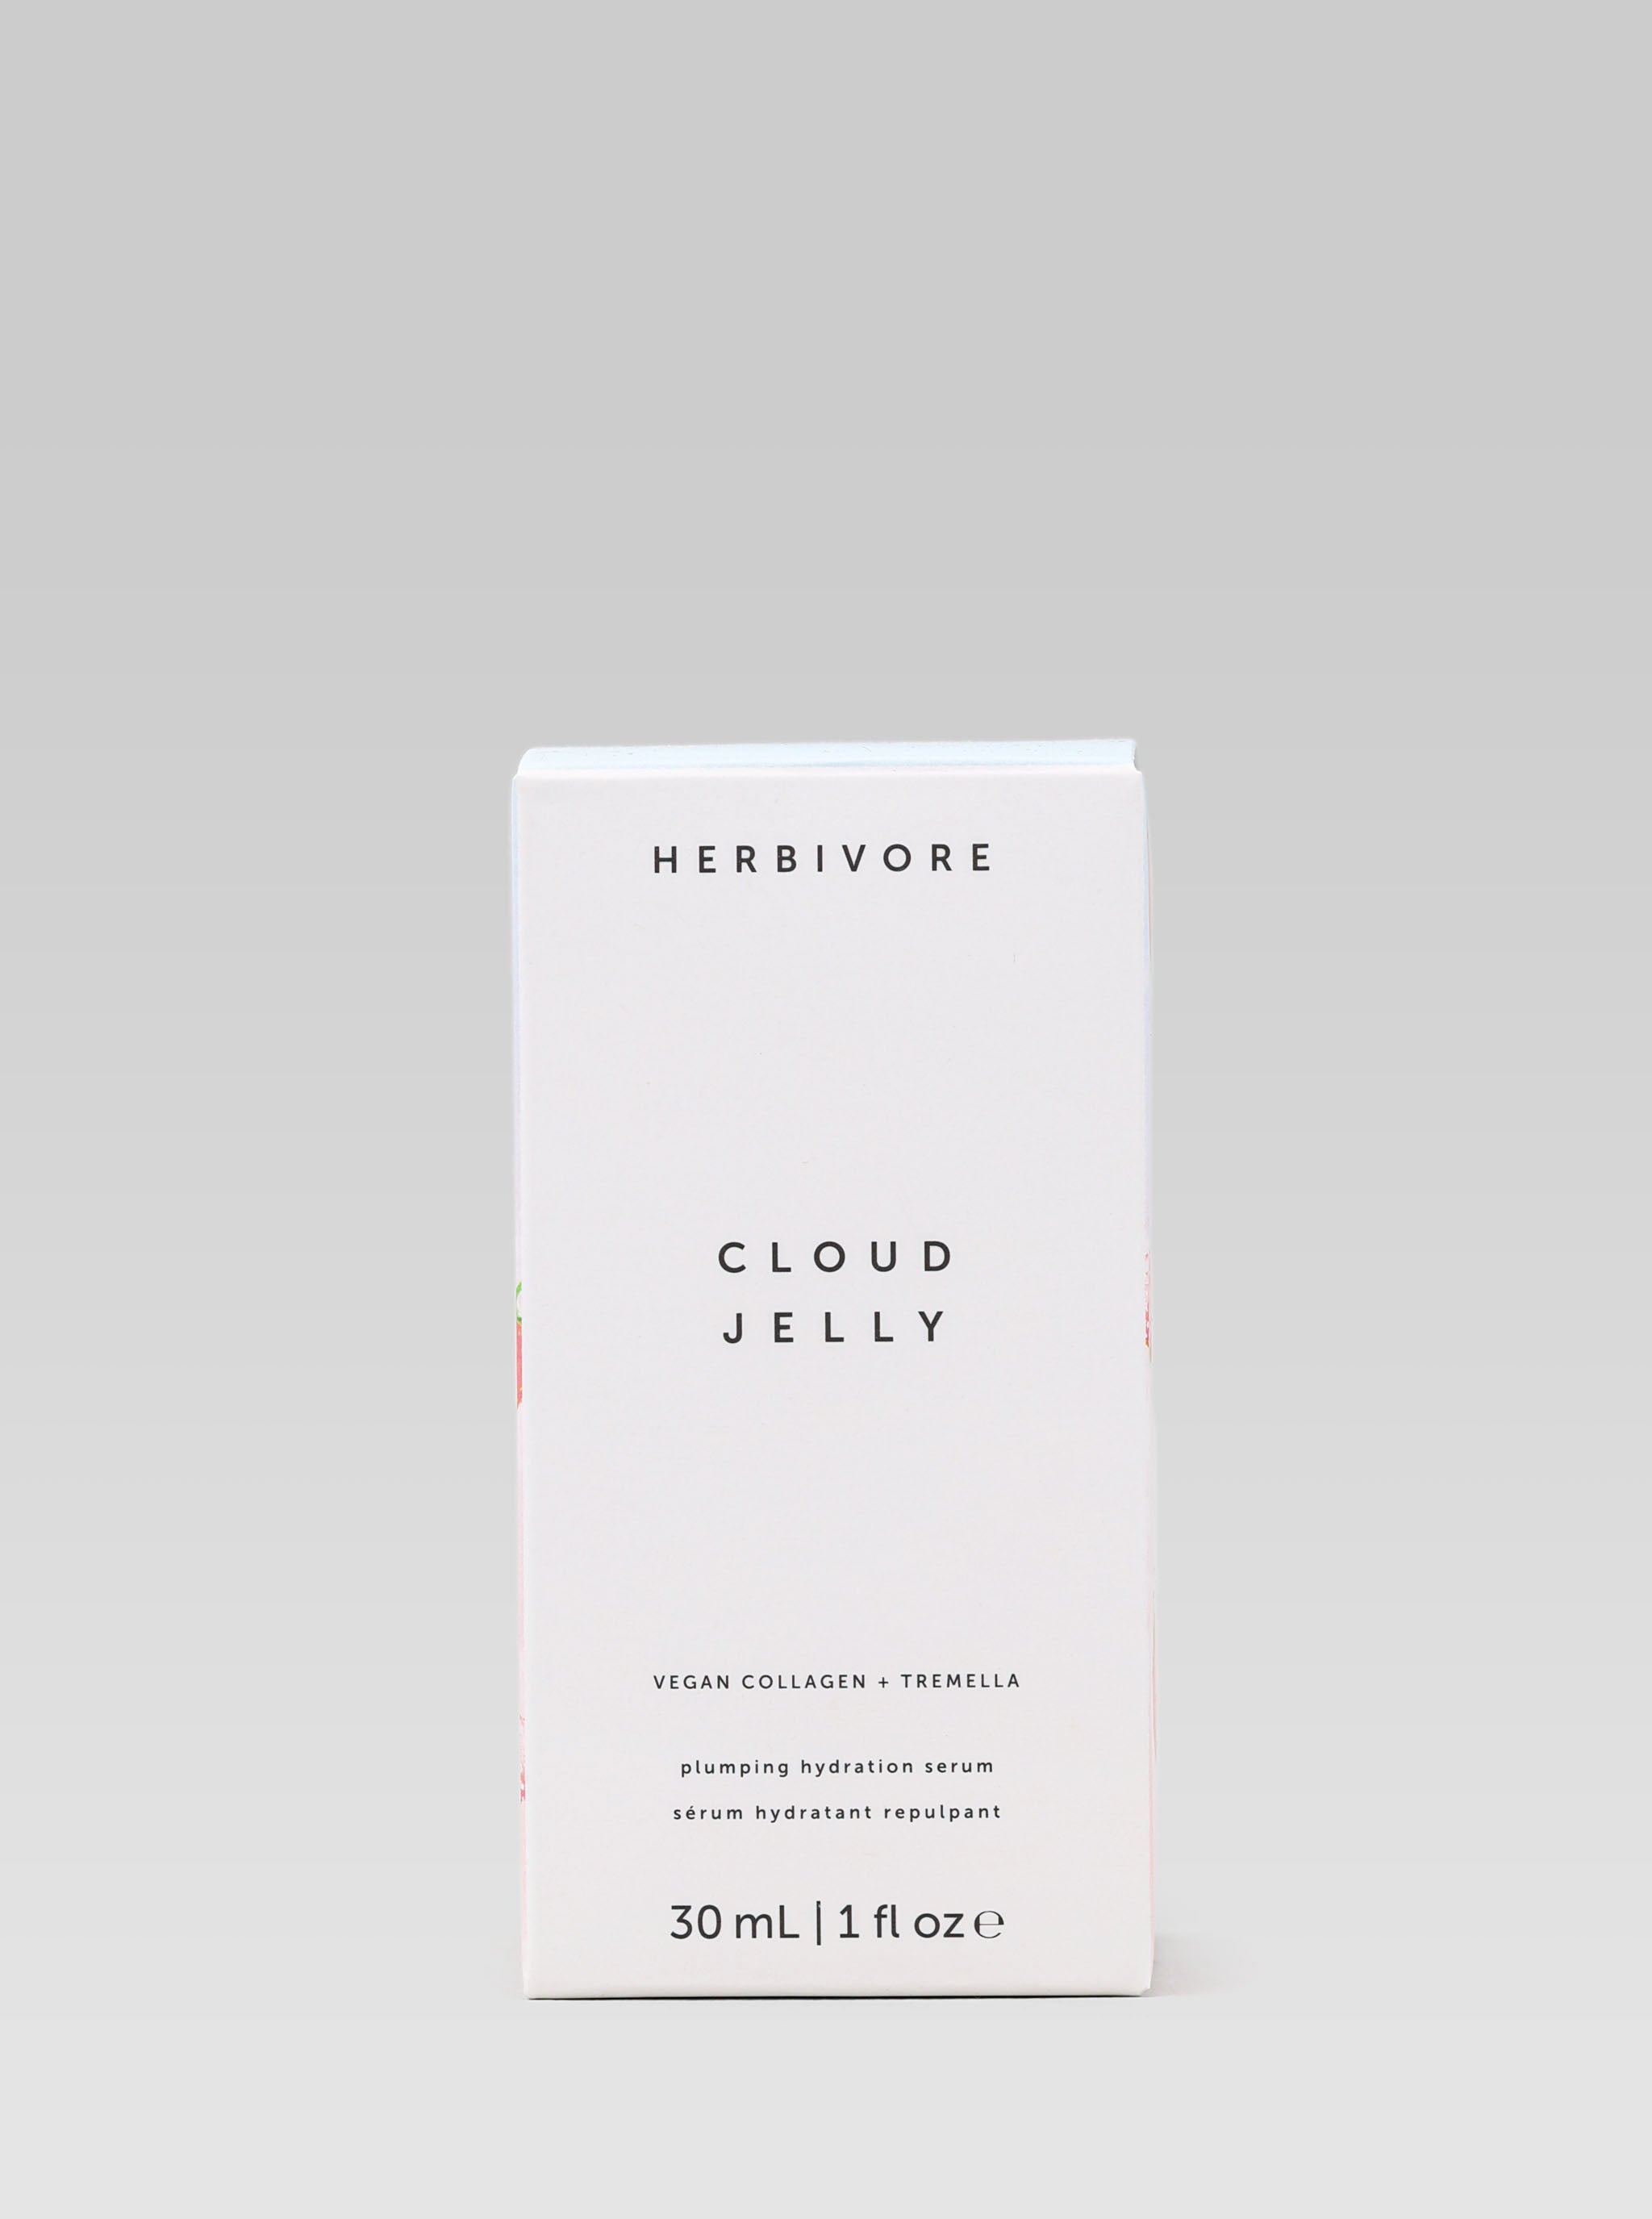 HERBIVORE BOTANICALS Cloud Jelly Pink Plumping Hydration Serum product packaging